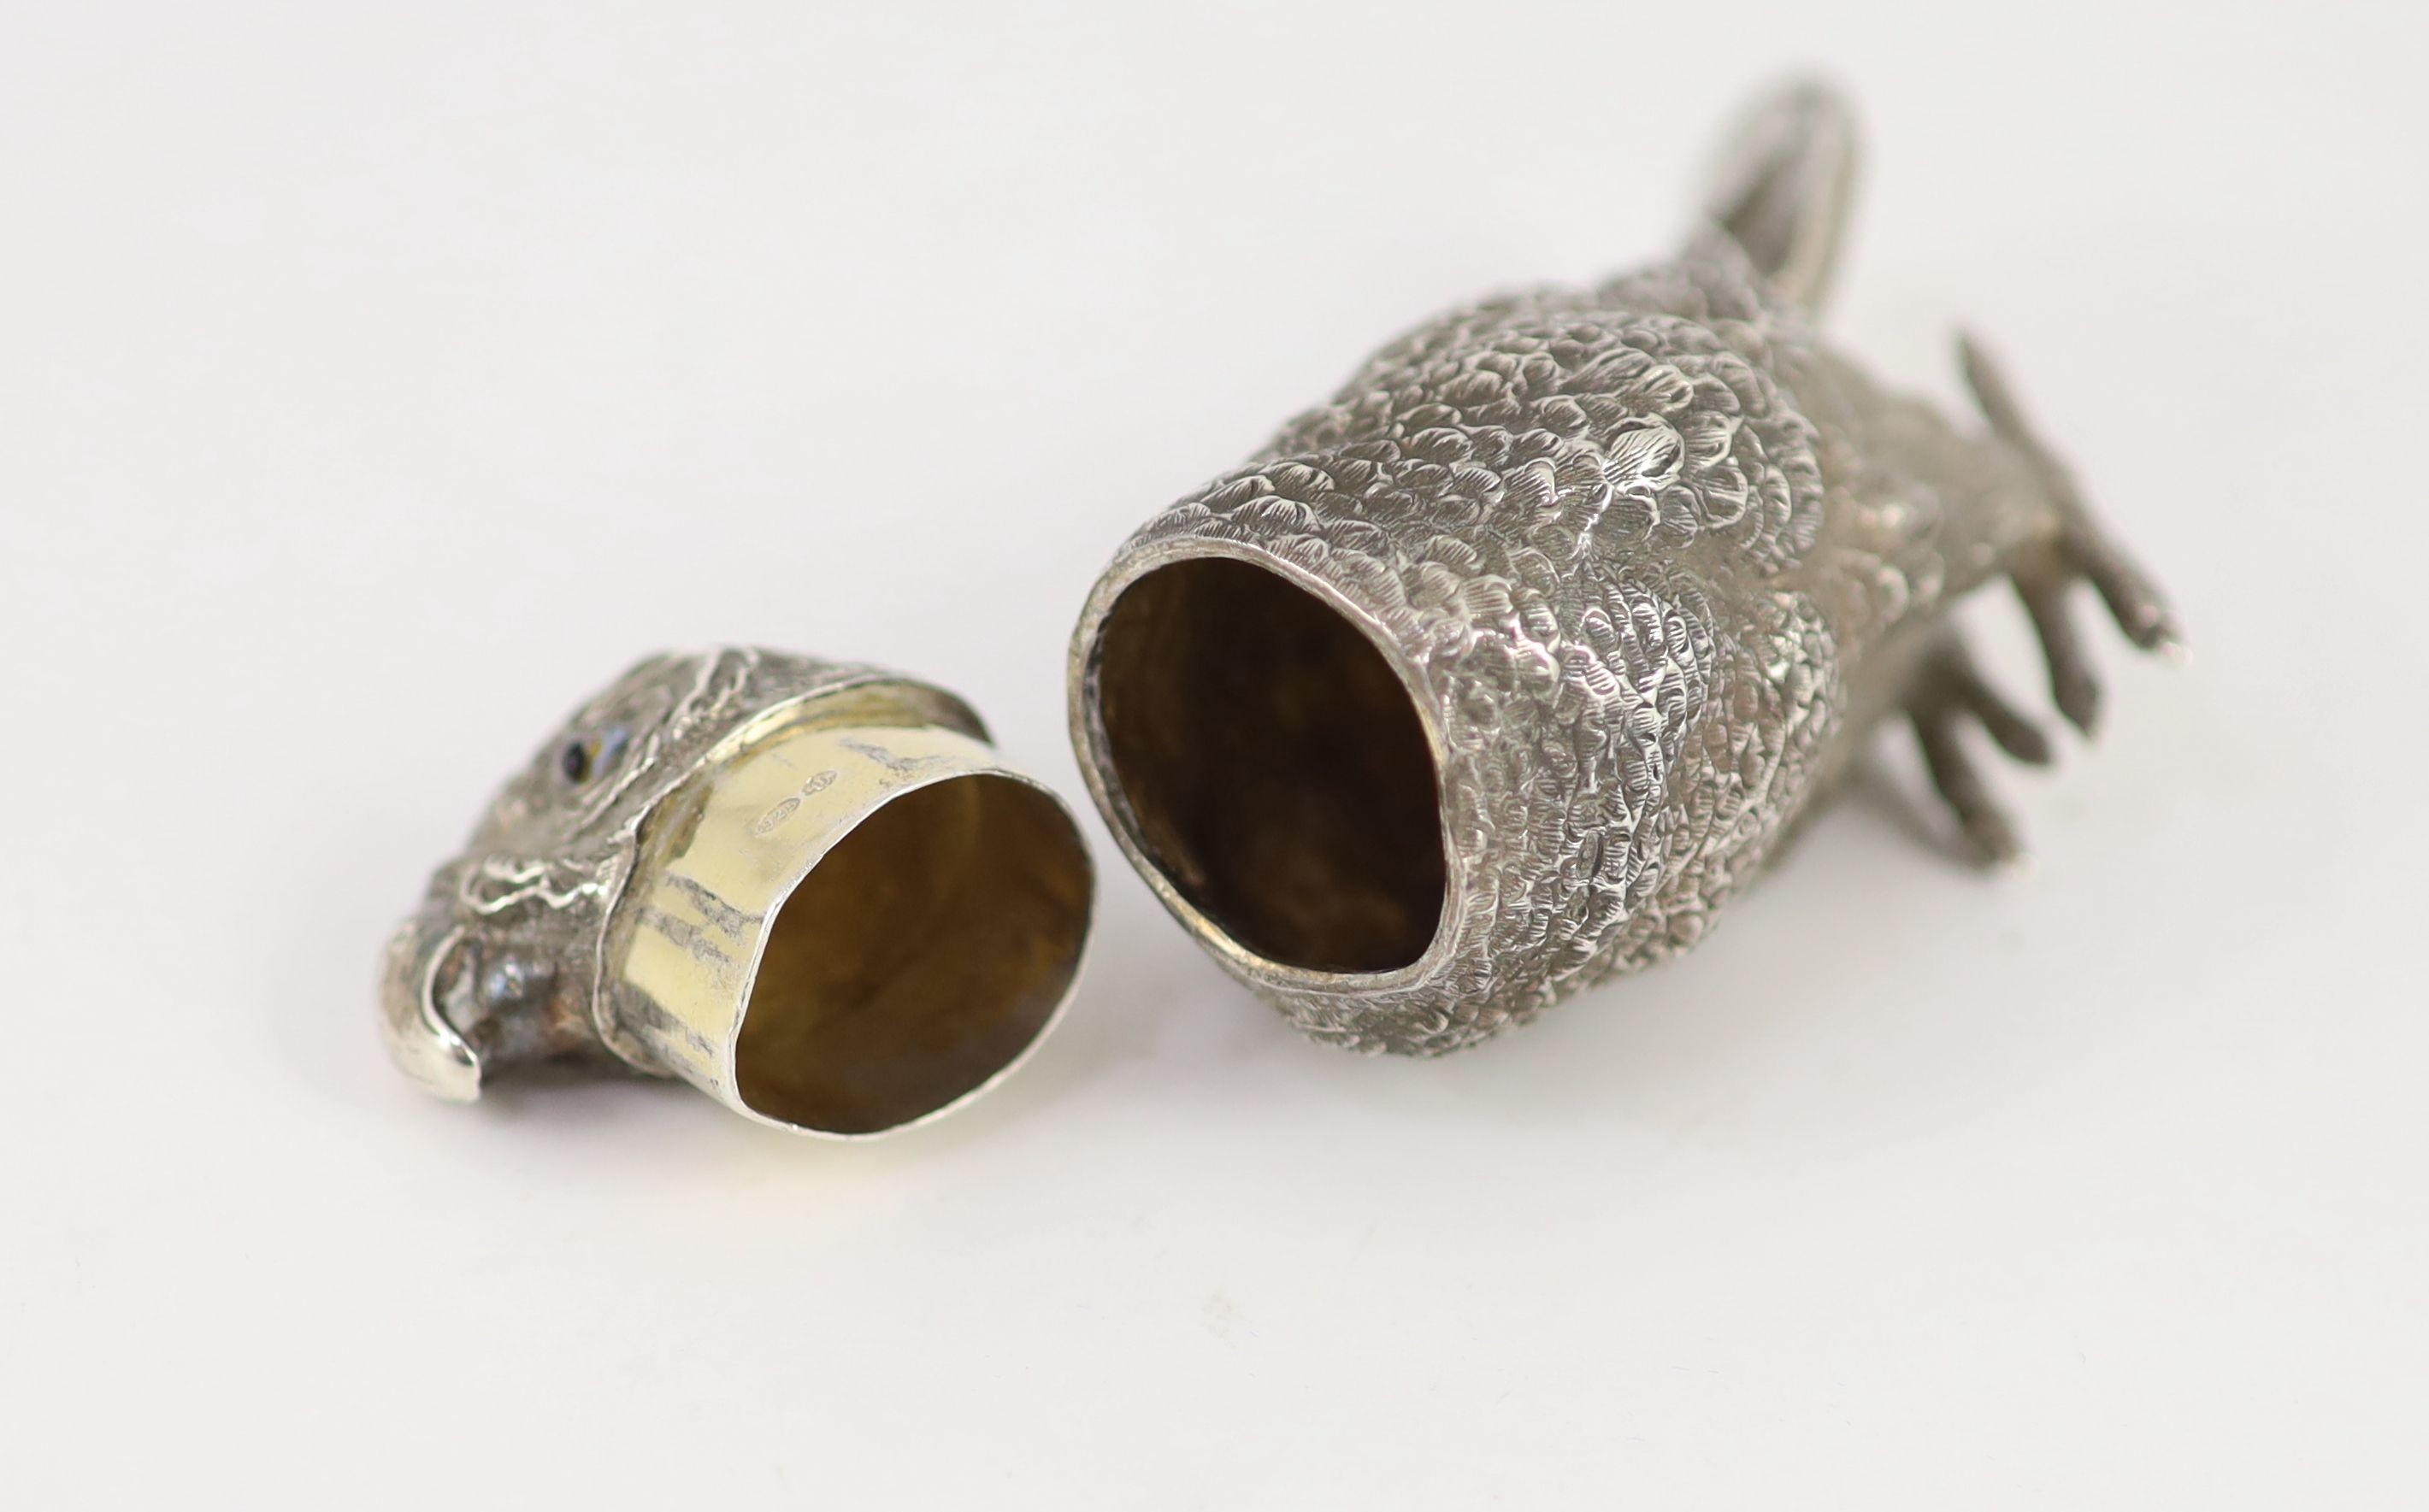 A late 19th century Hanau novelty silver pepperette, modelled as a parrot